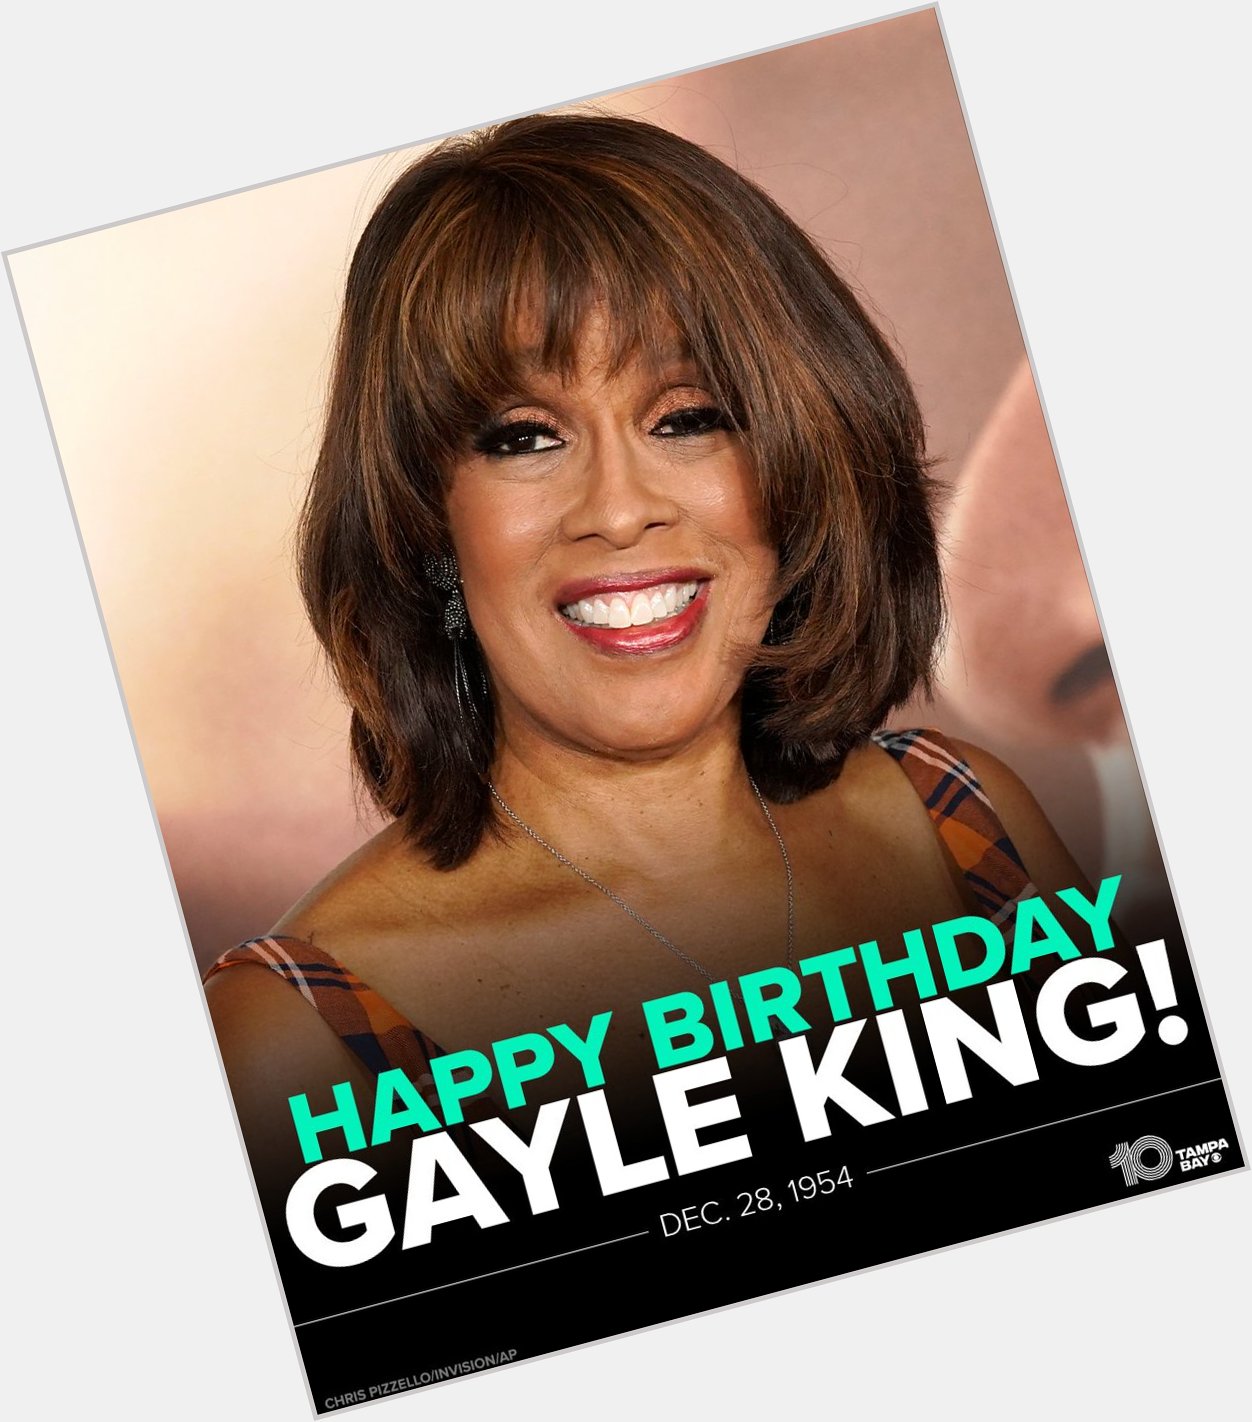 HAPPY BIRTHDAY! CBS\ very own Gayle King is celebrating her 67th birthday today! 